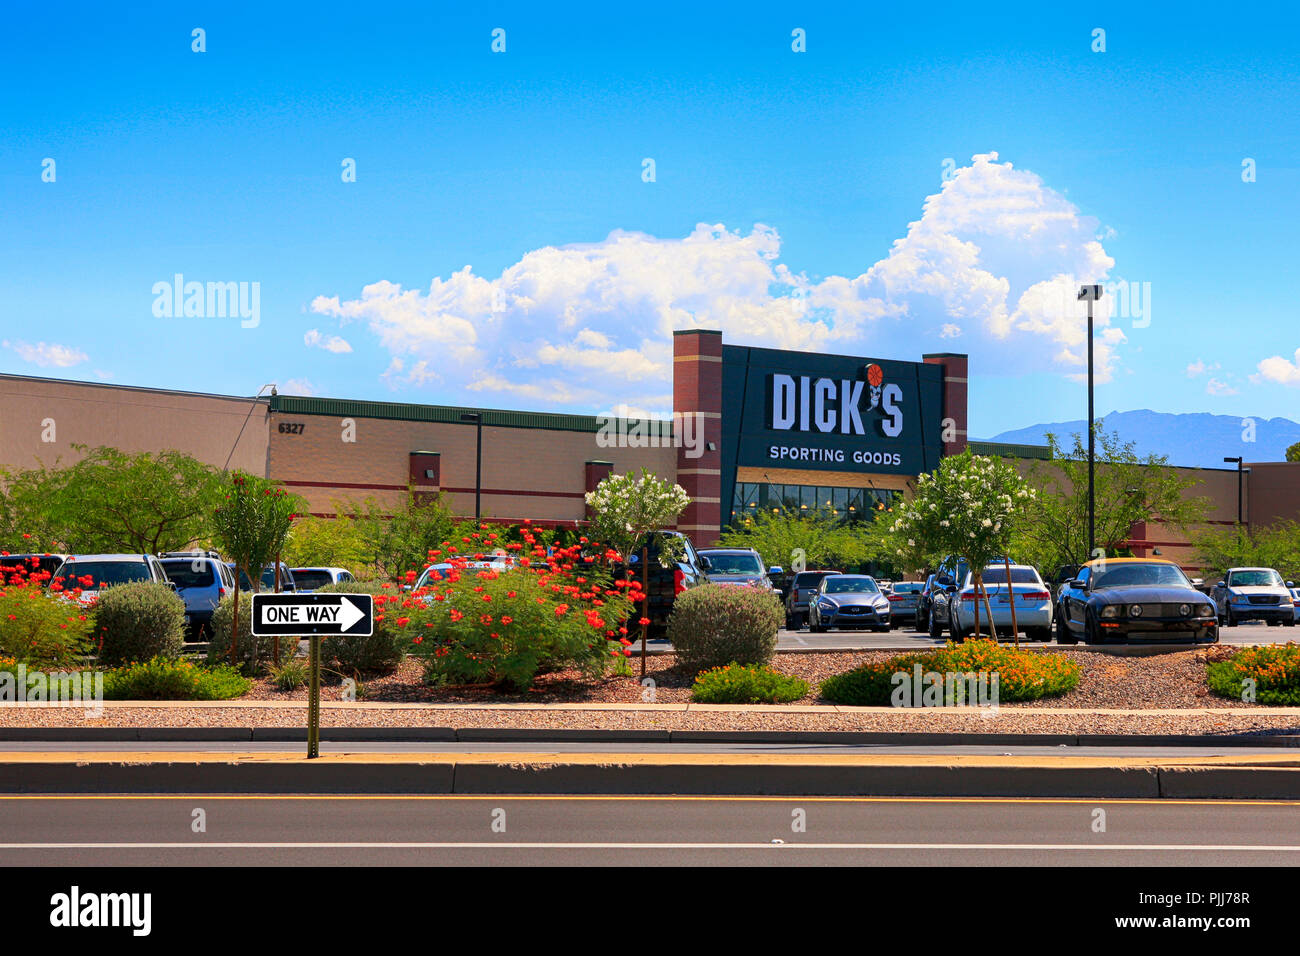 Dick's Sporting Goods store in a strip mall in Tucson AZ Stock Photo